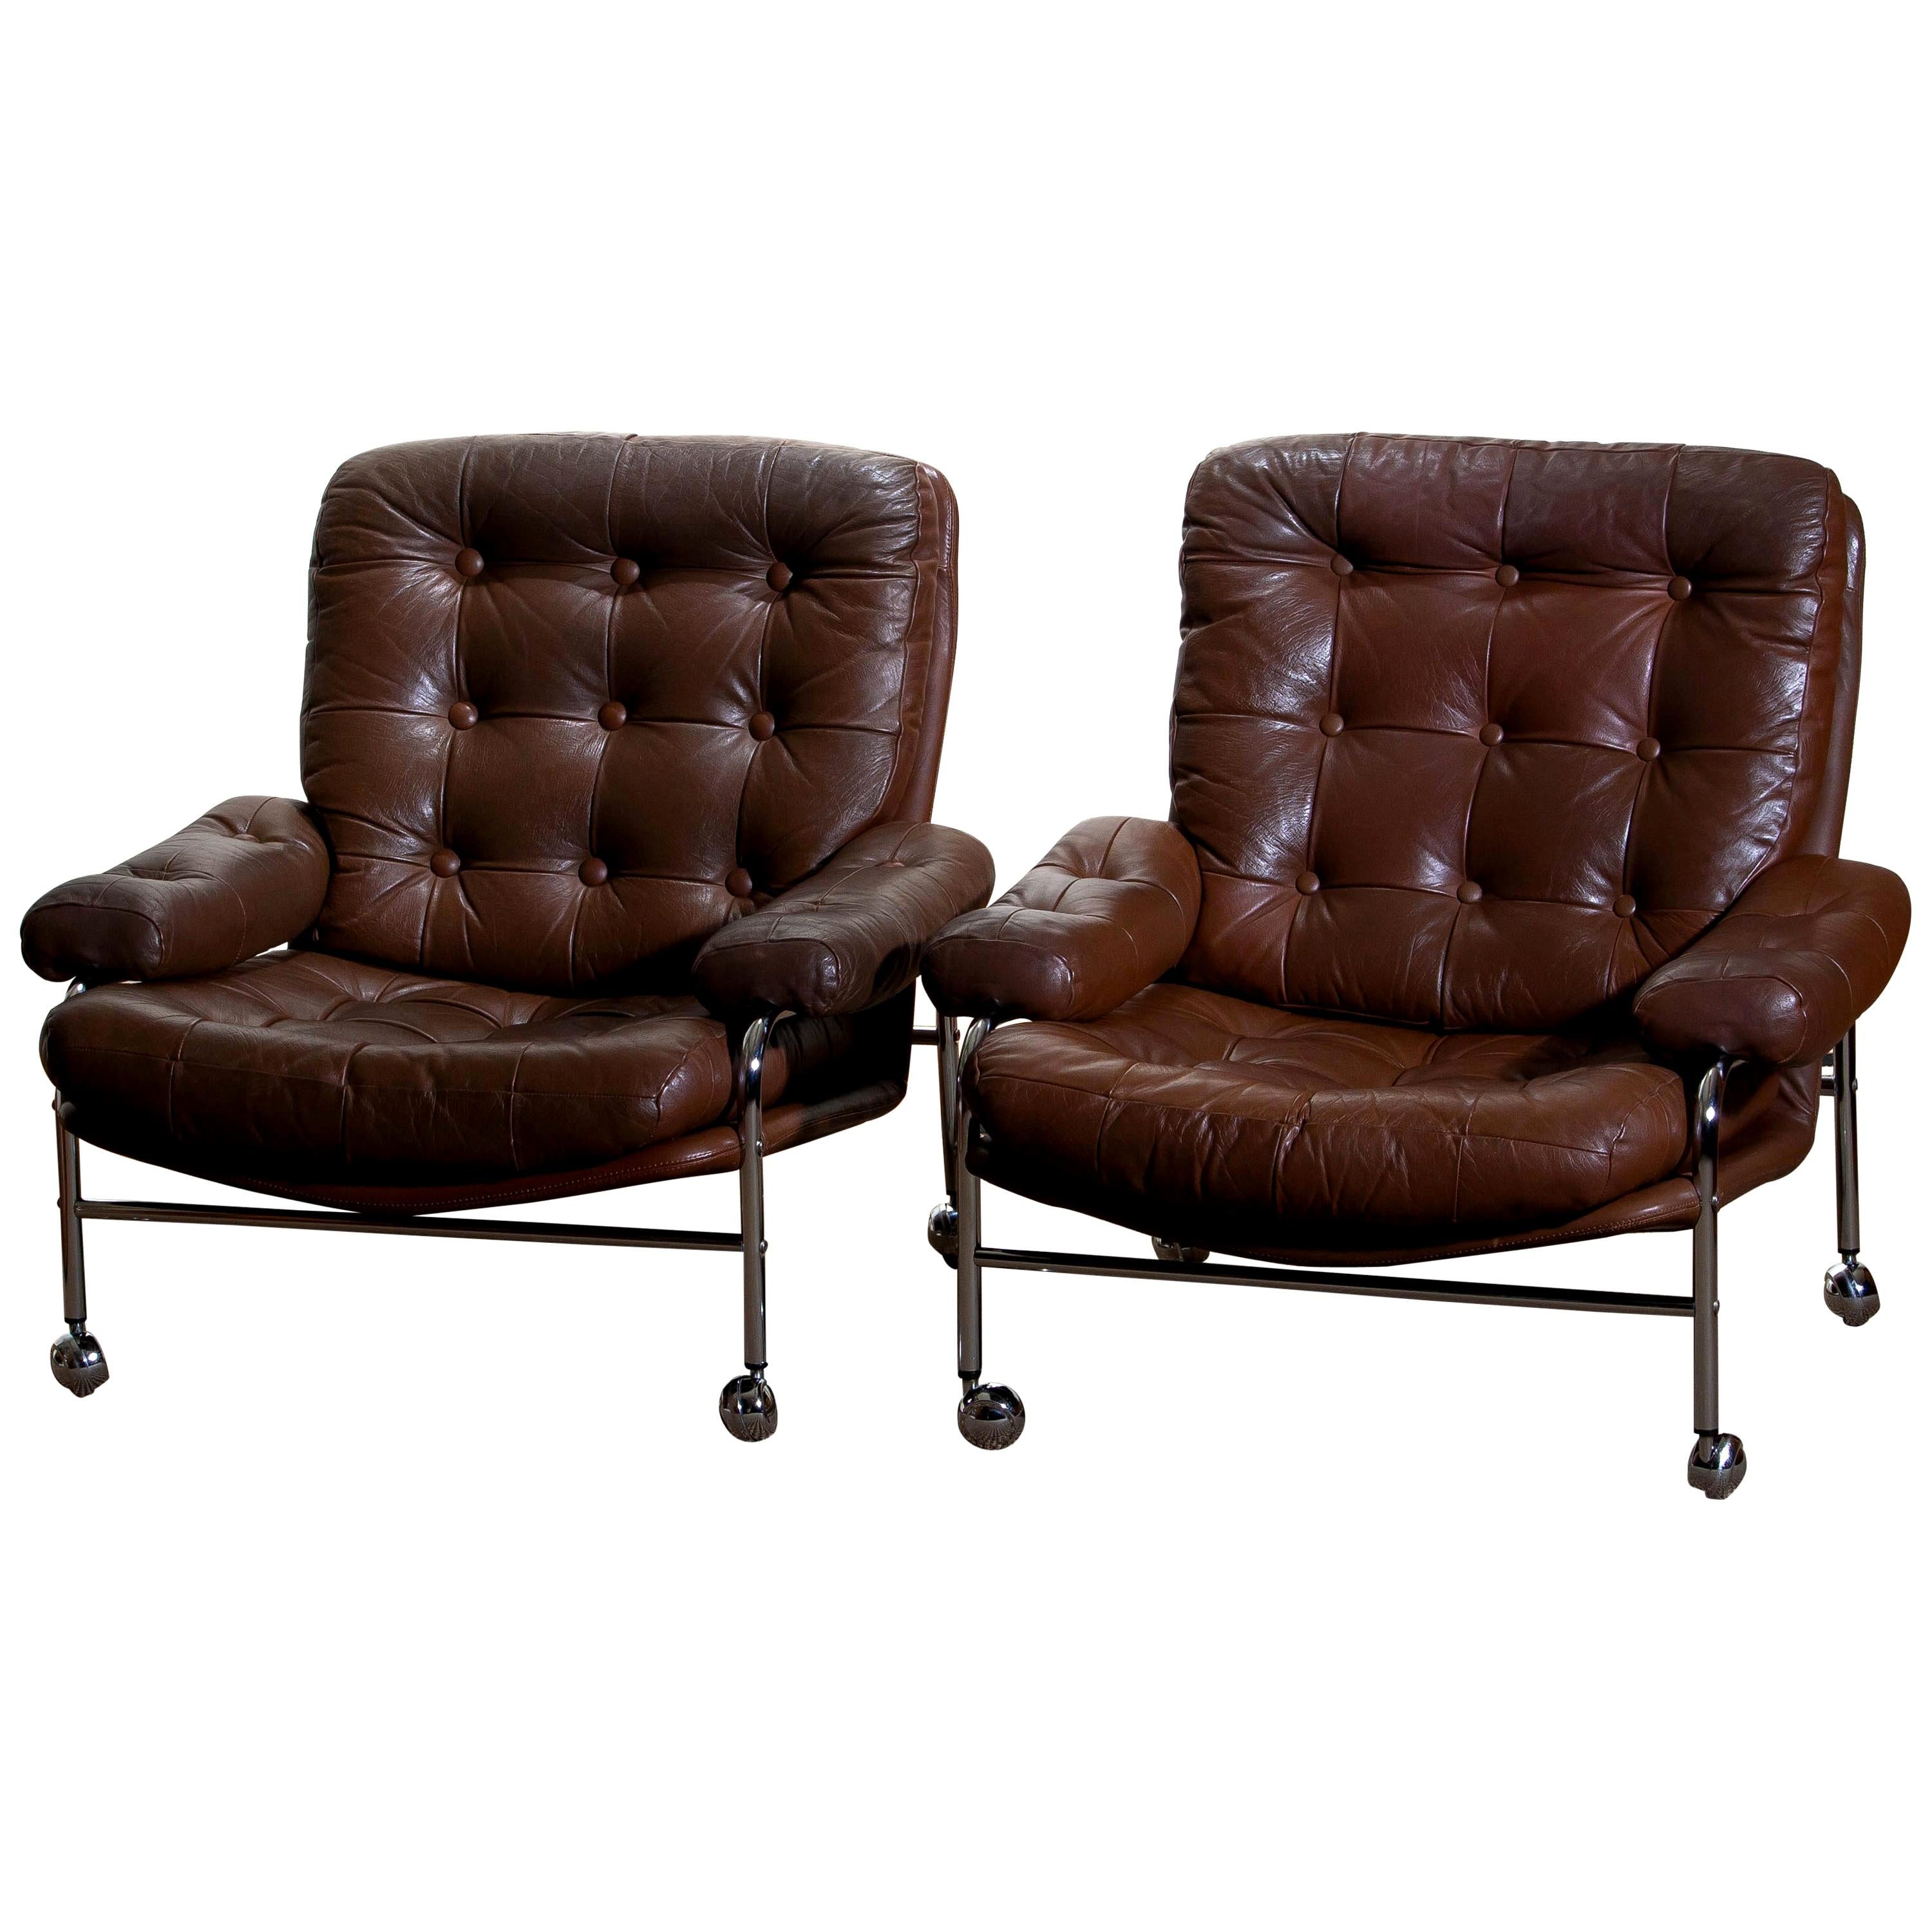 Mid-Century Modern 1970s, Chrome and Brown Leather Lounge Chairs by Scapa Rydaholm, Sweden